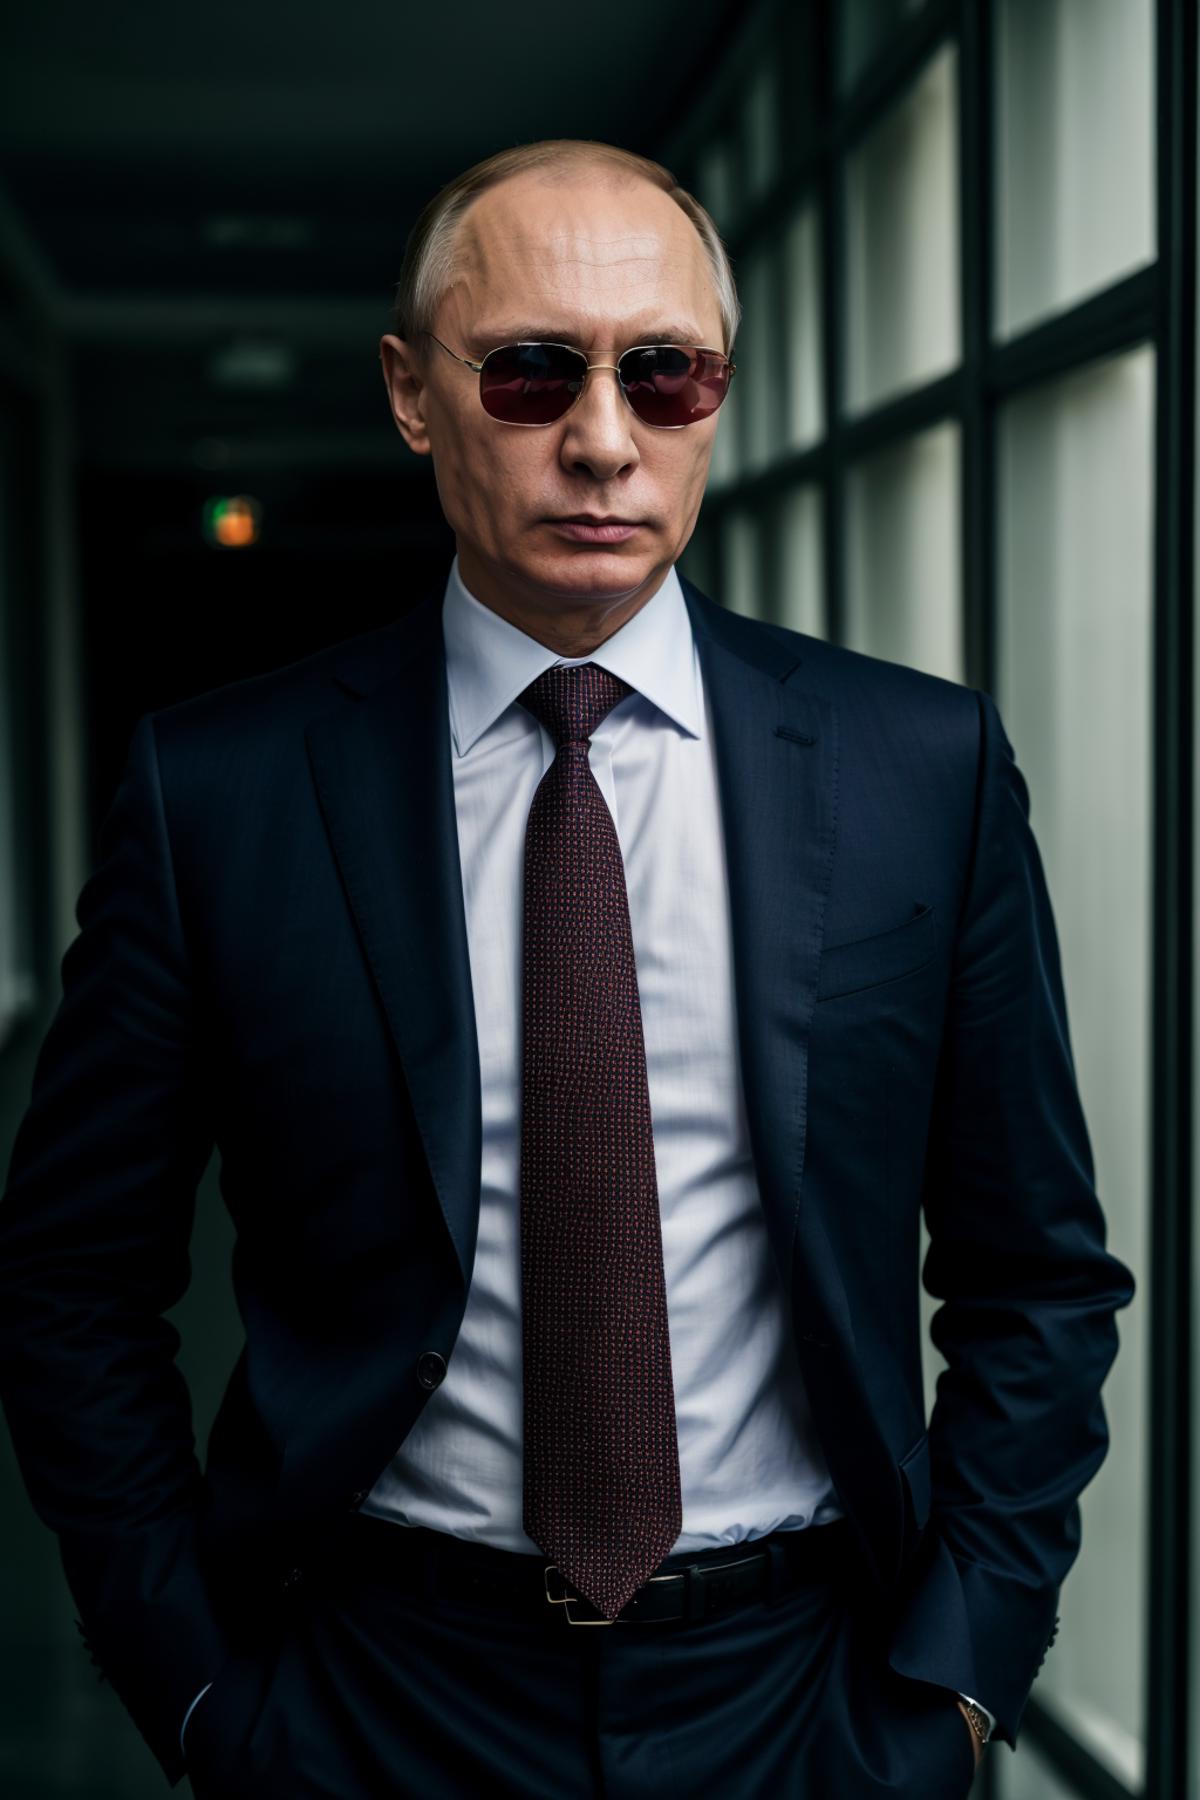 Putin in a suit and tie.